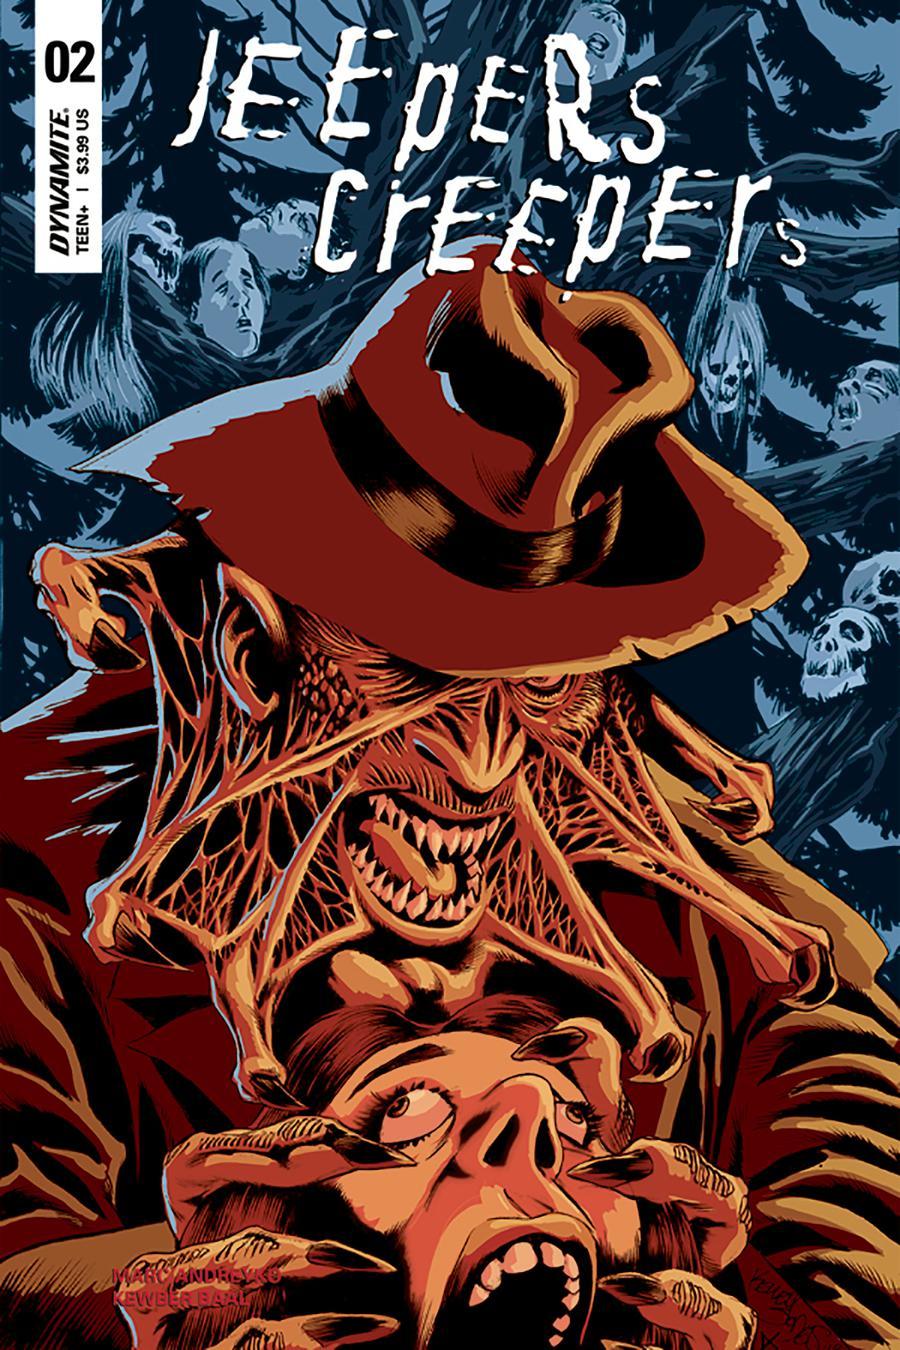 Jeepers Creepers Vol. 1 #2